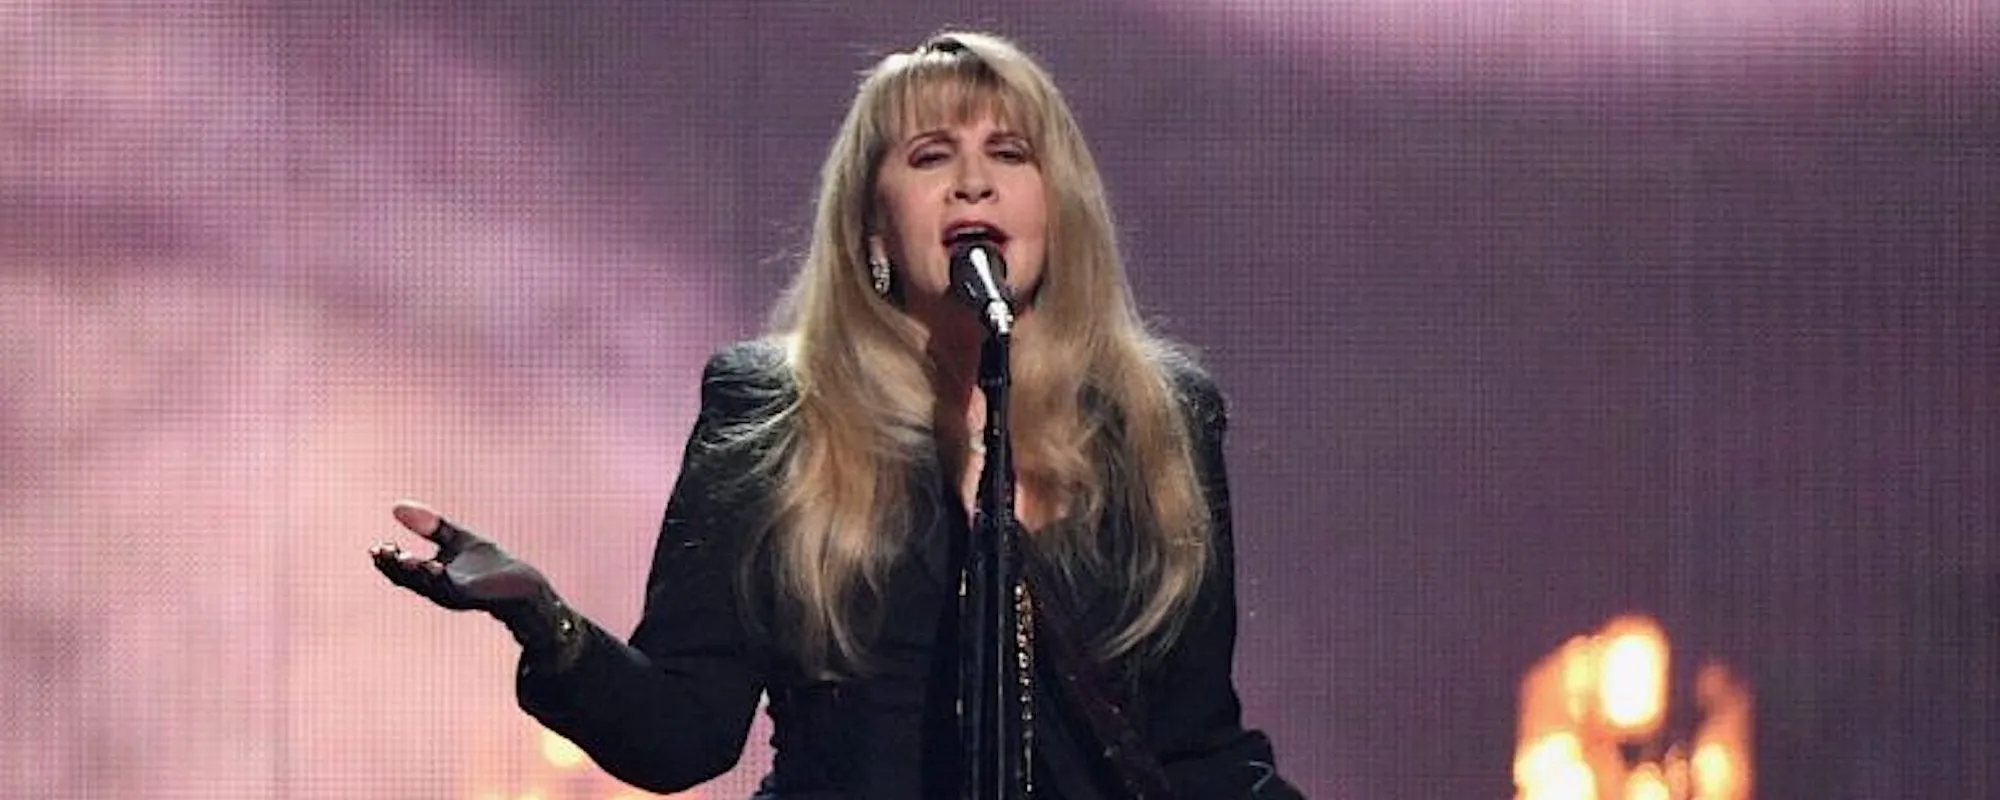 Stevie Nicks Compares Putin to Hitler in Latest Social Media Post: “This is Hitler Coming Back to Haunt Us”